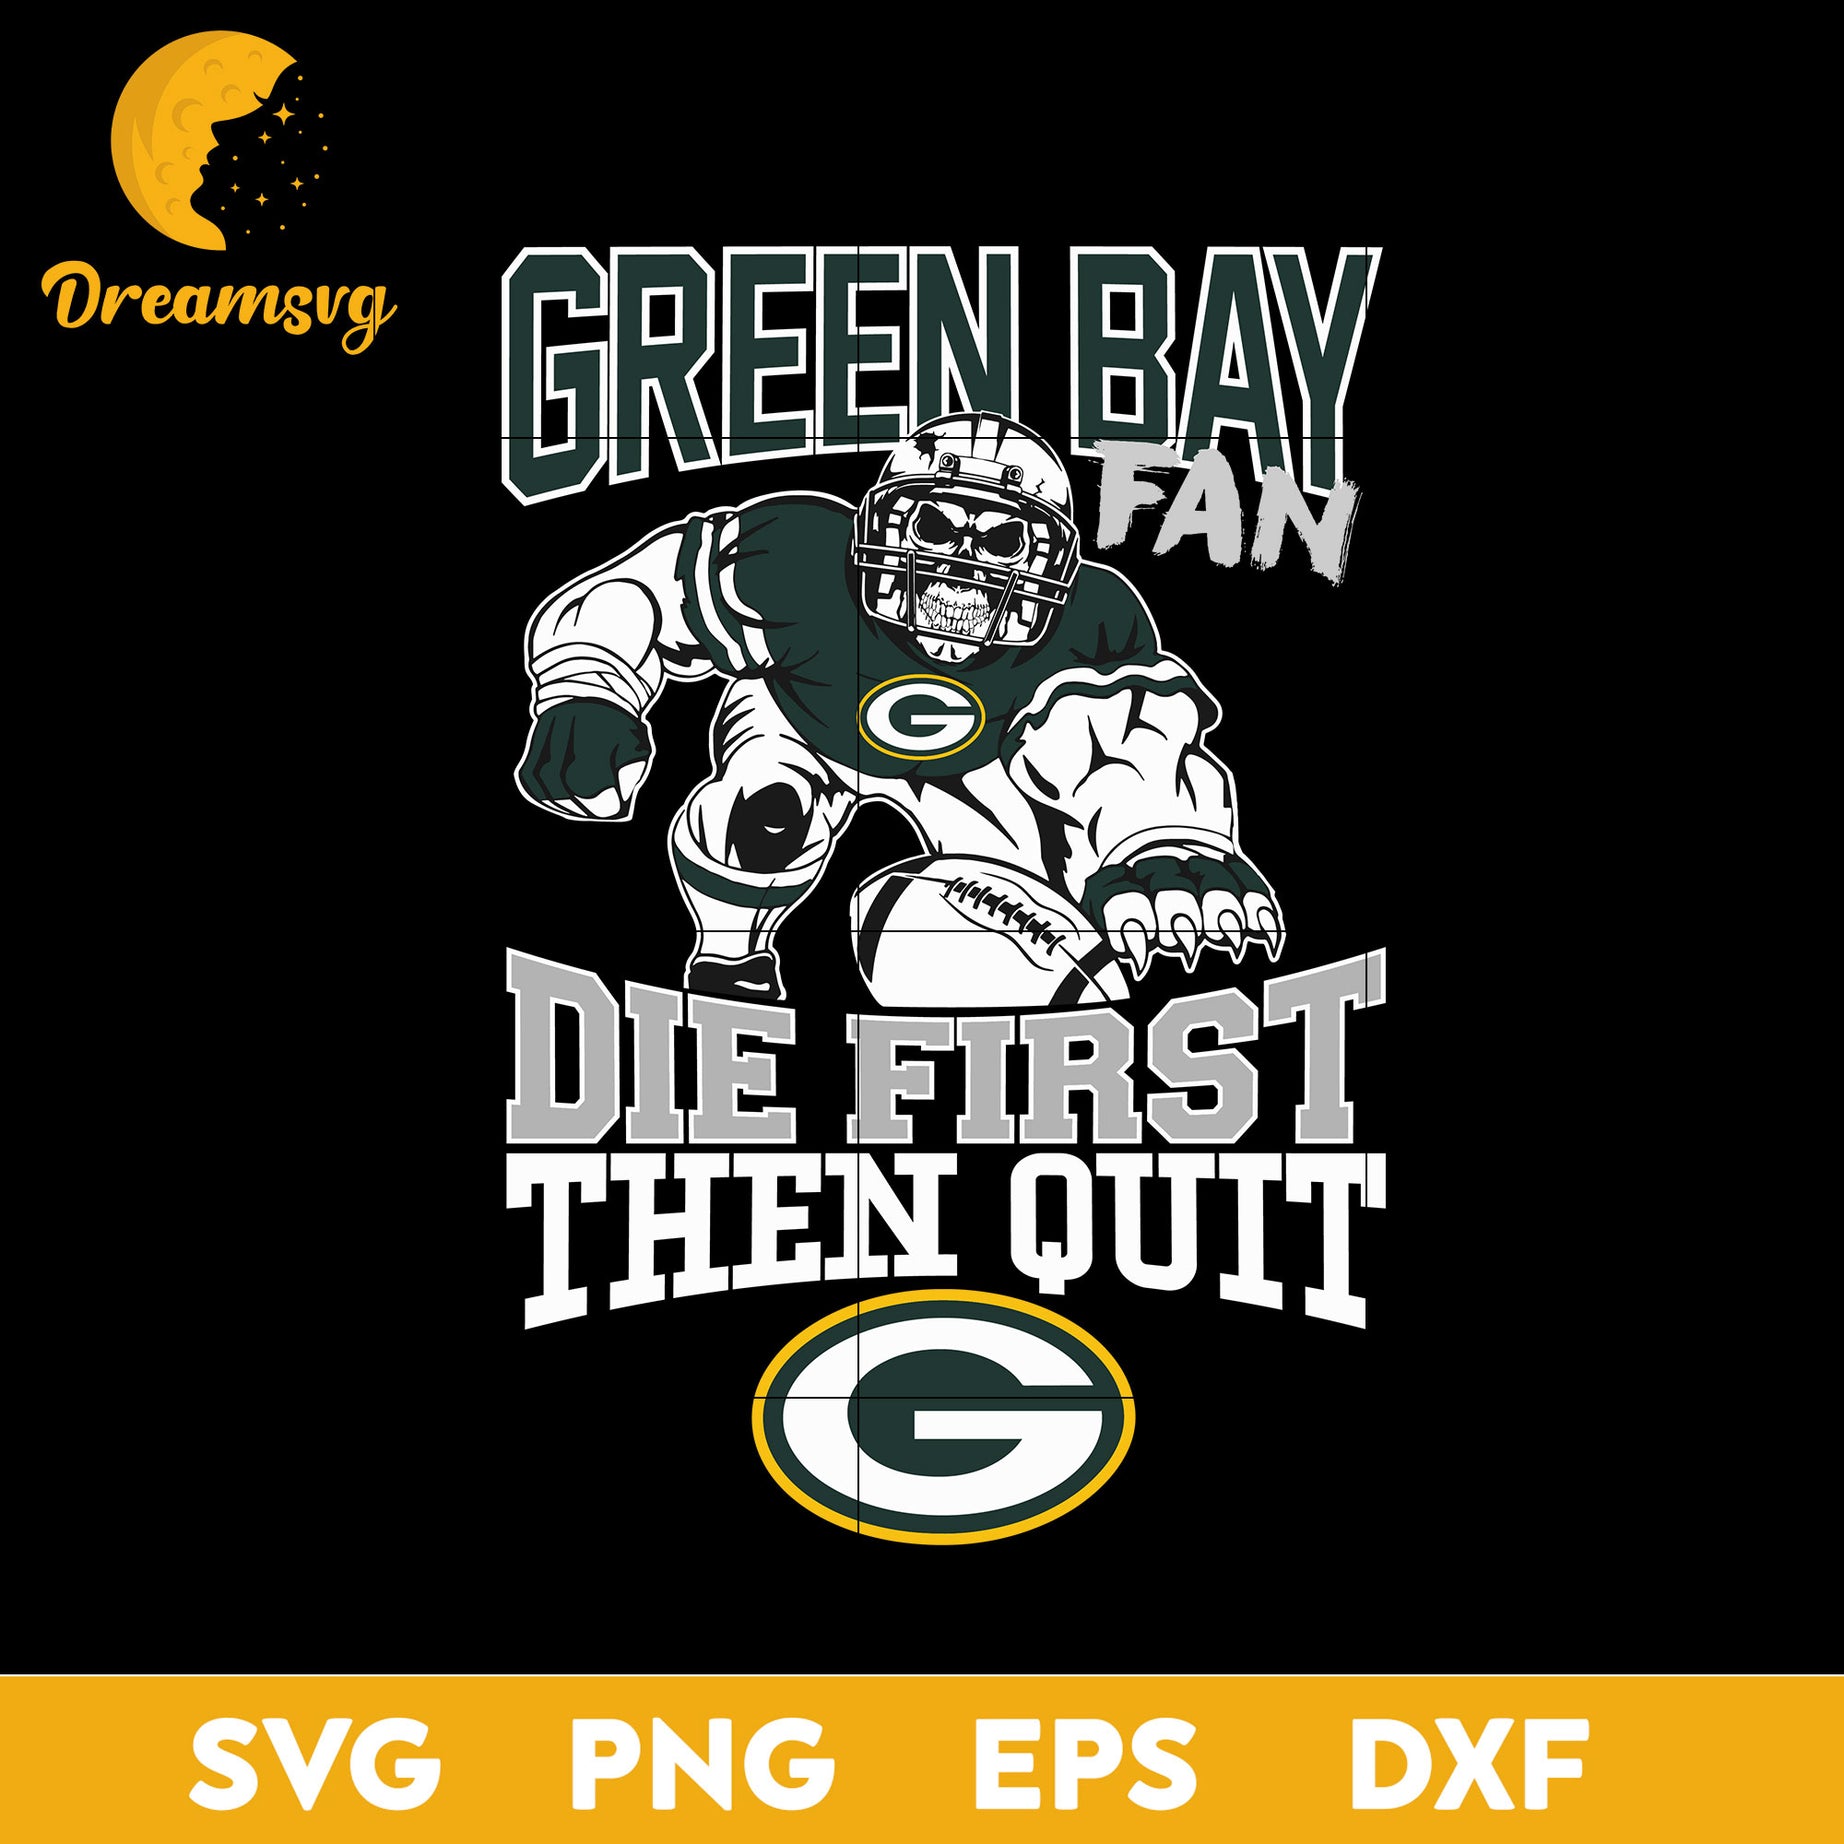 Green Bay Packers Fan Die First Then Quit Svg, Green Bay Packers Nfl Svg, Png, Dxf, Eps file.